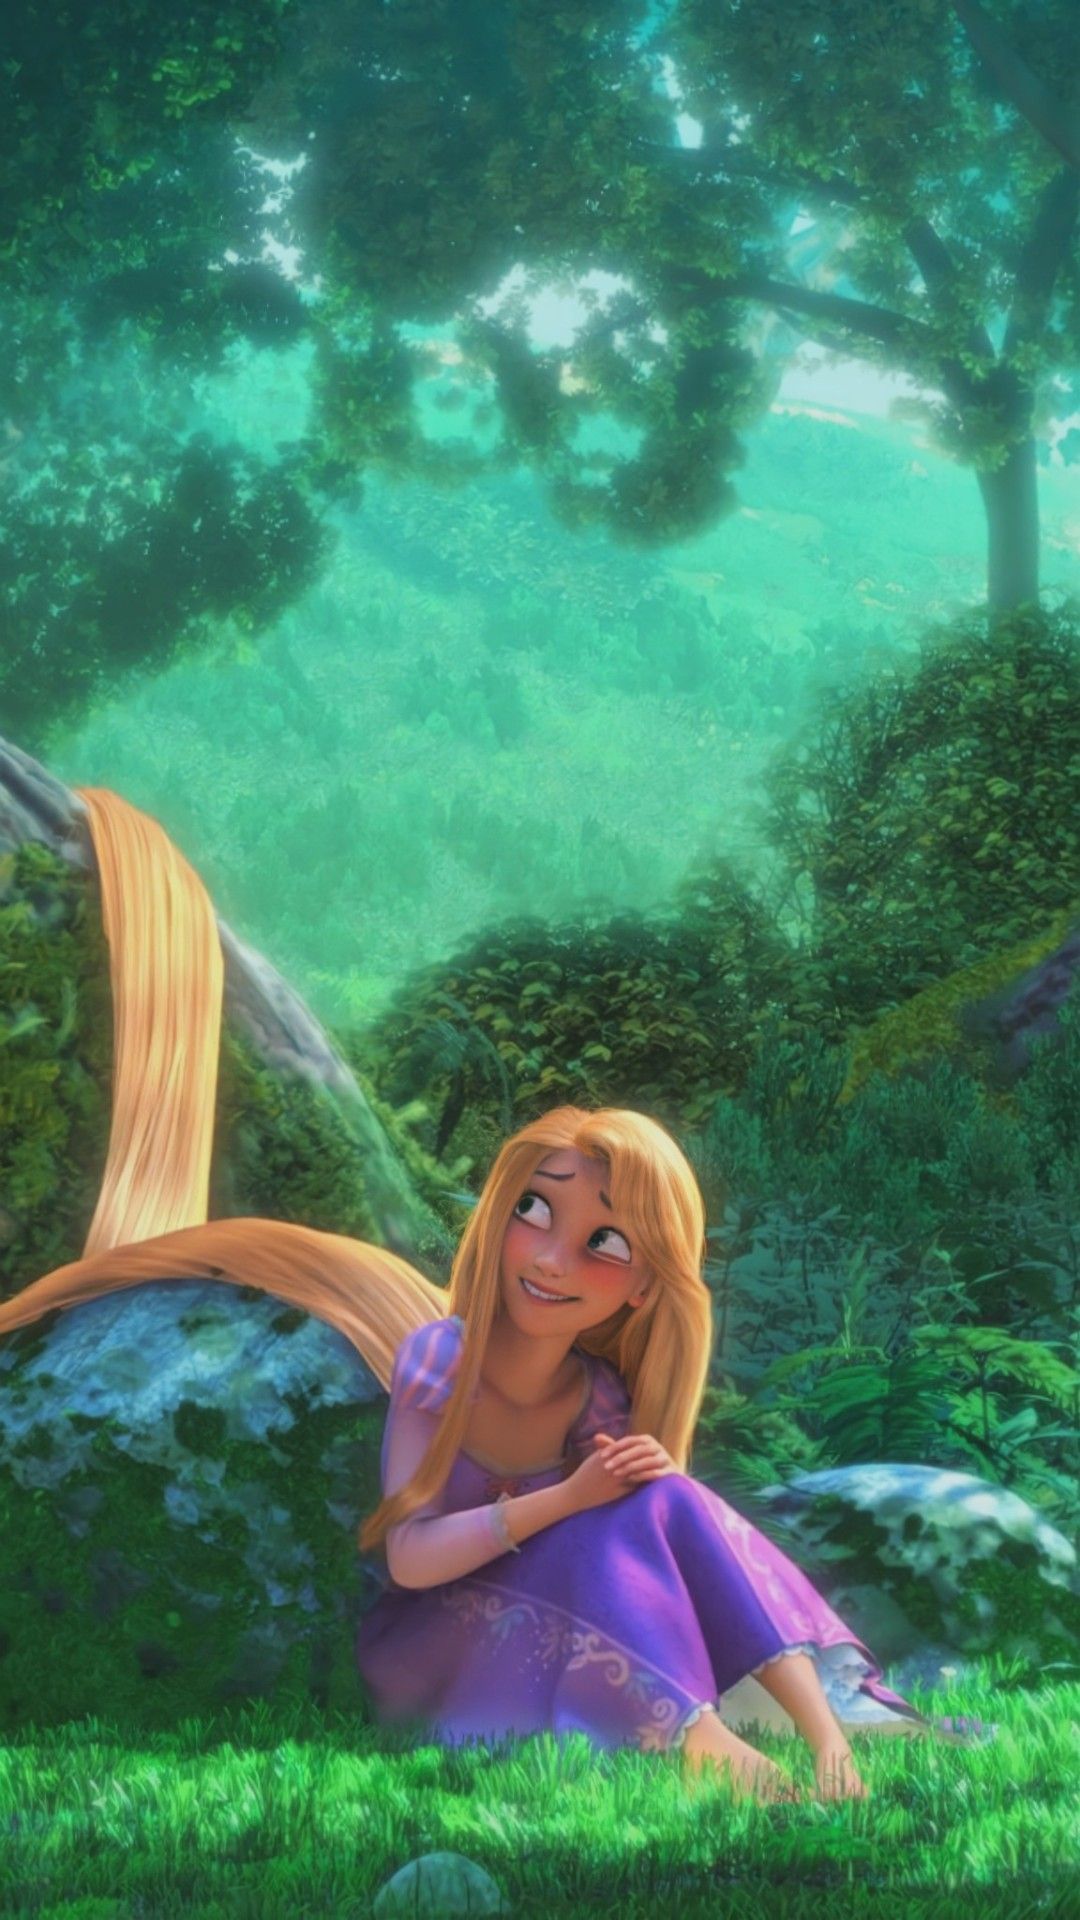 A cartoon character sitting on the ground in front of some trees - Rapunzel